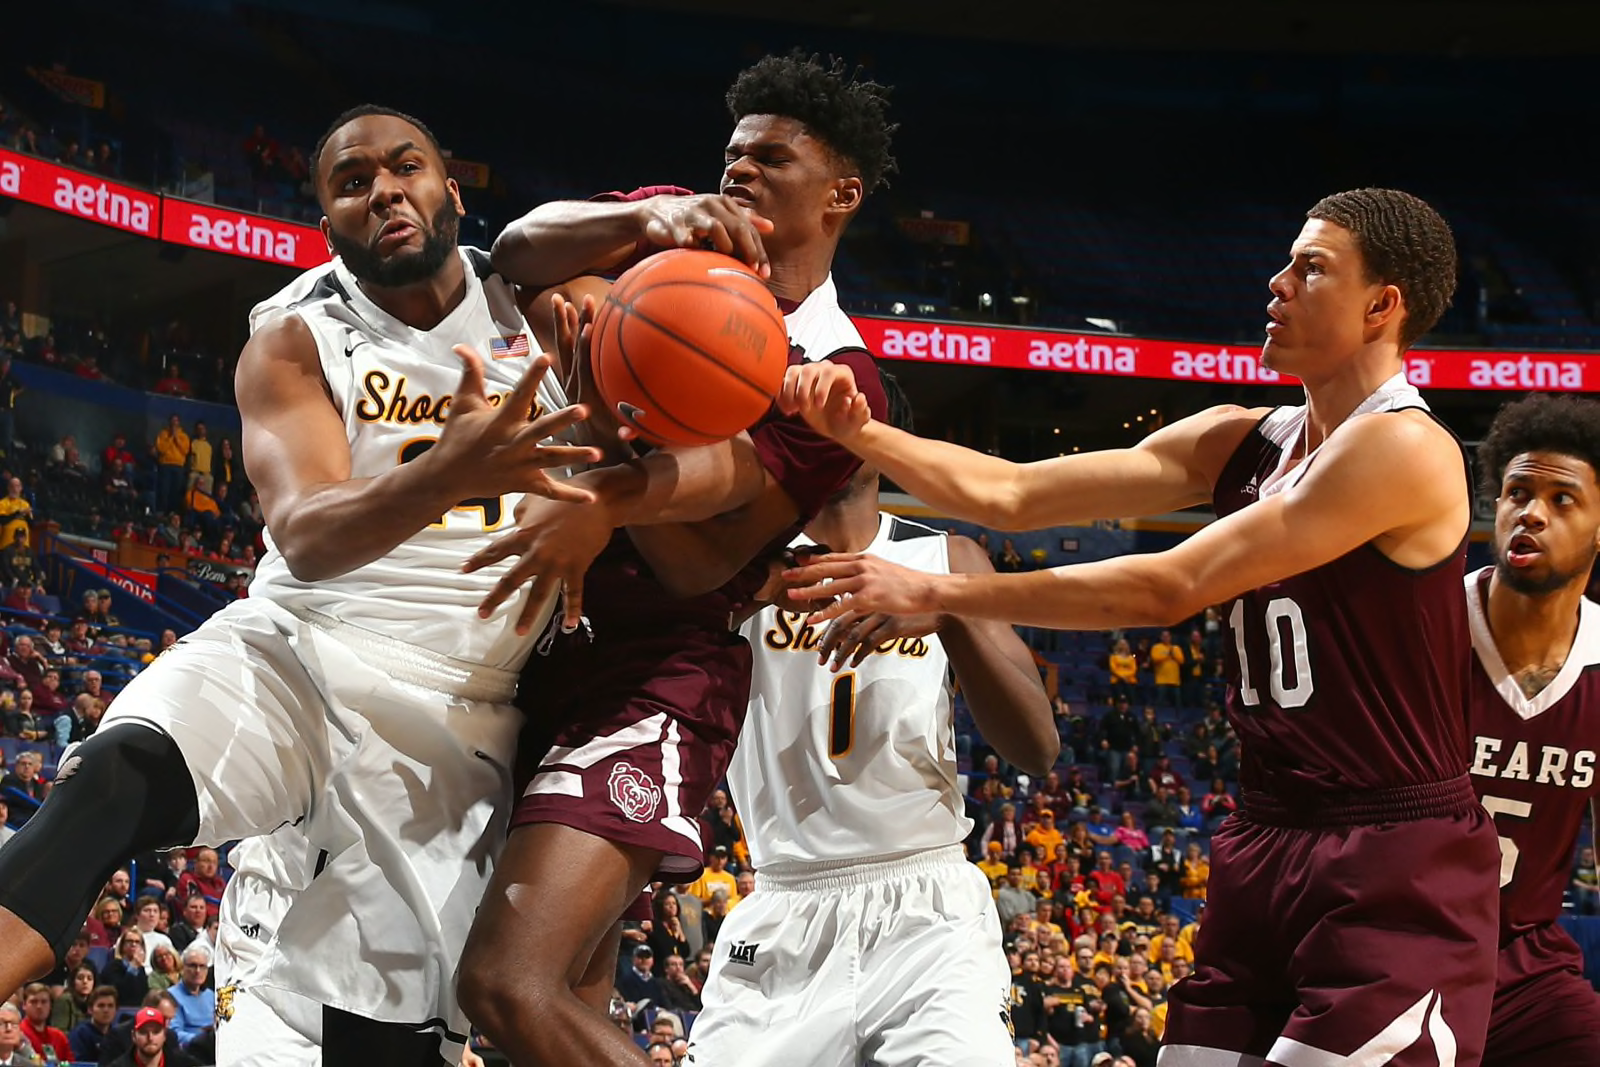 Missouri State Basketball: 2019-20 season preview for Bears - Page 2